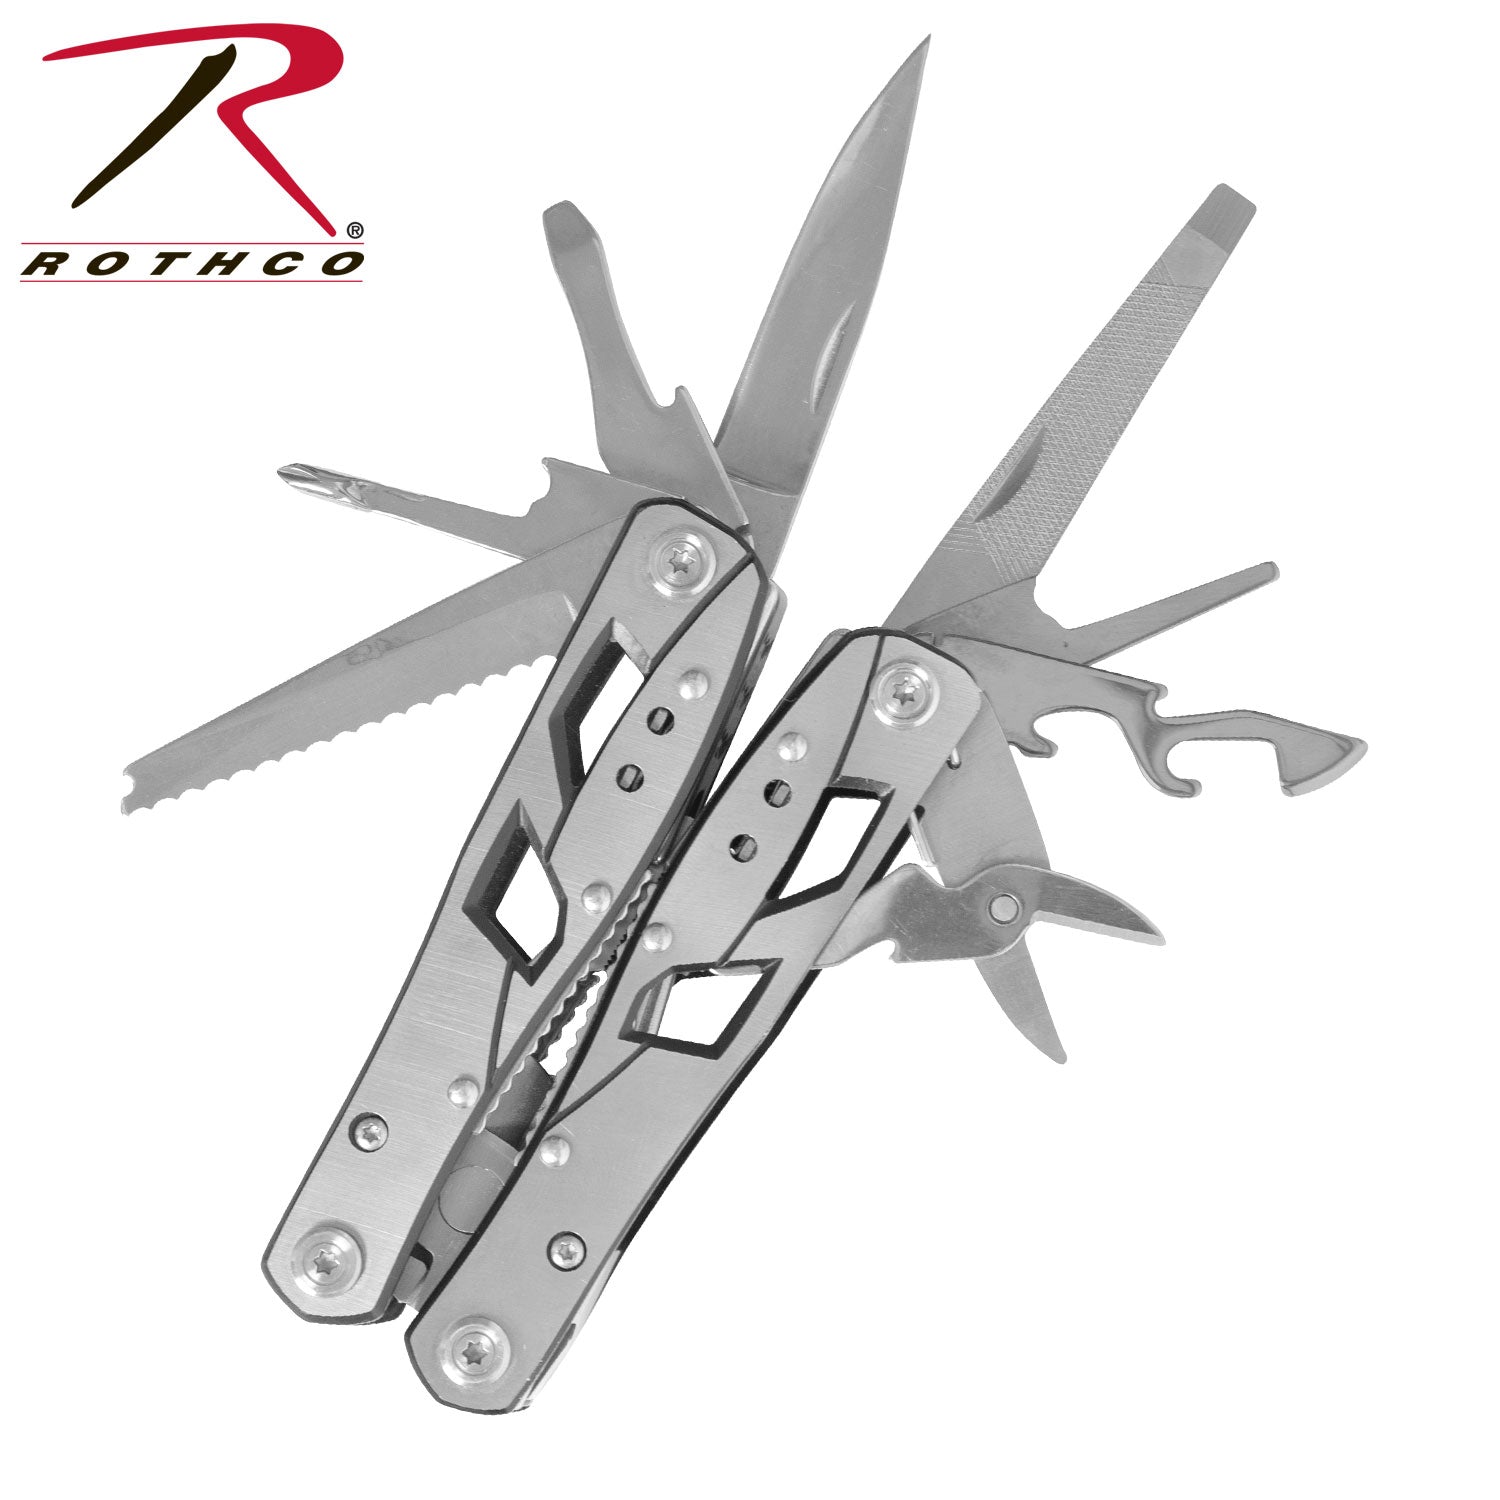 Rothco Stainless Steel Multi-Tool